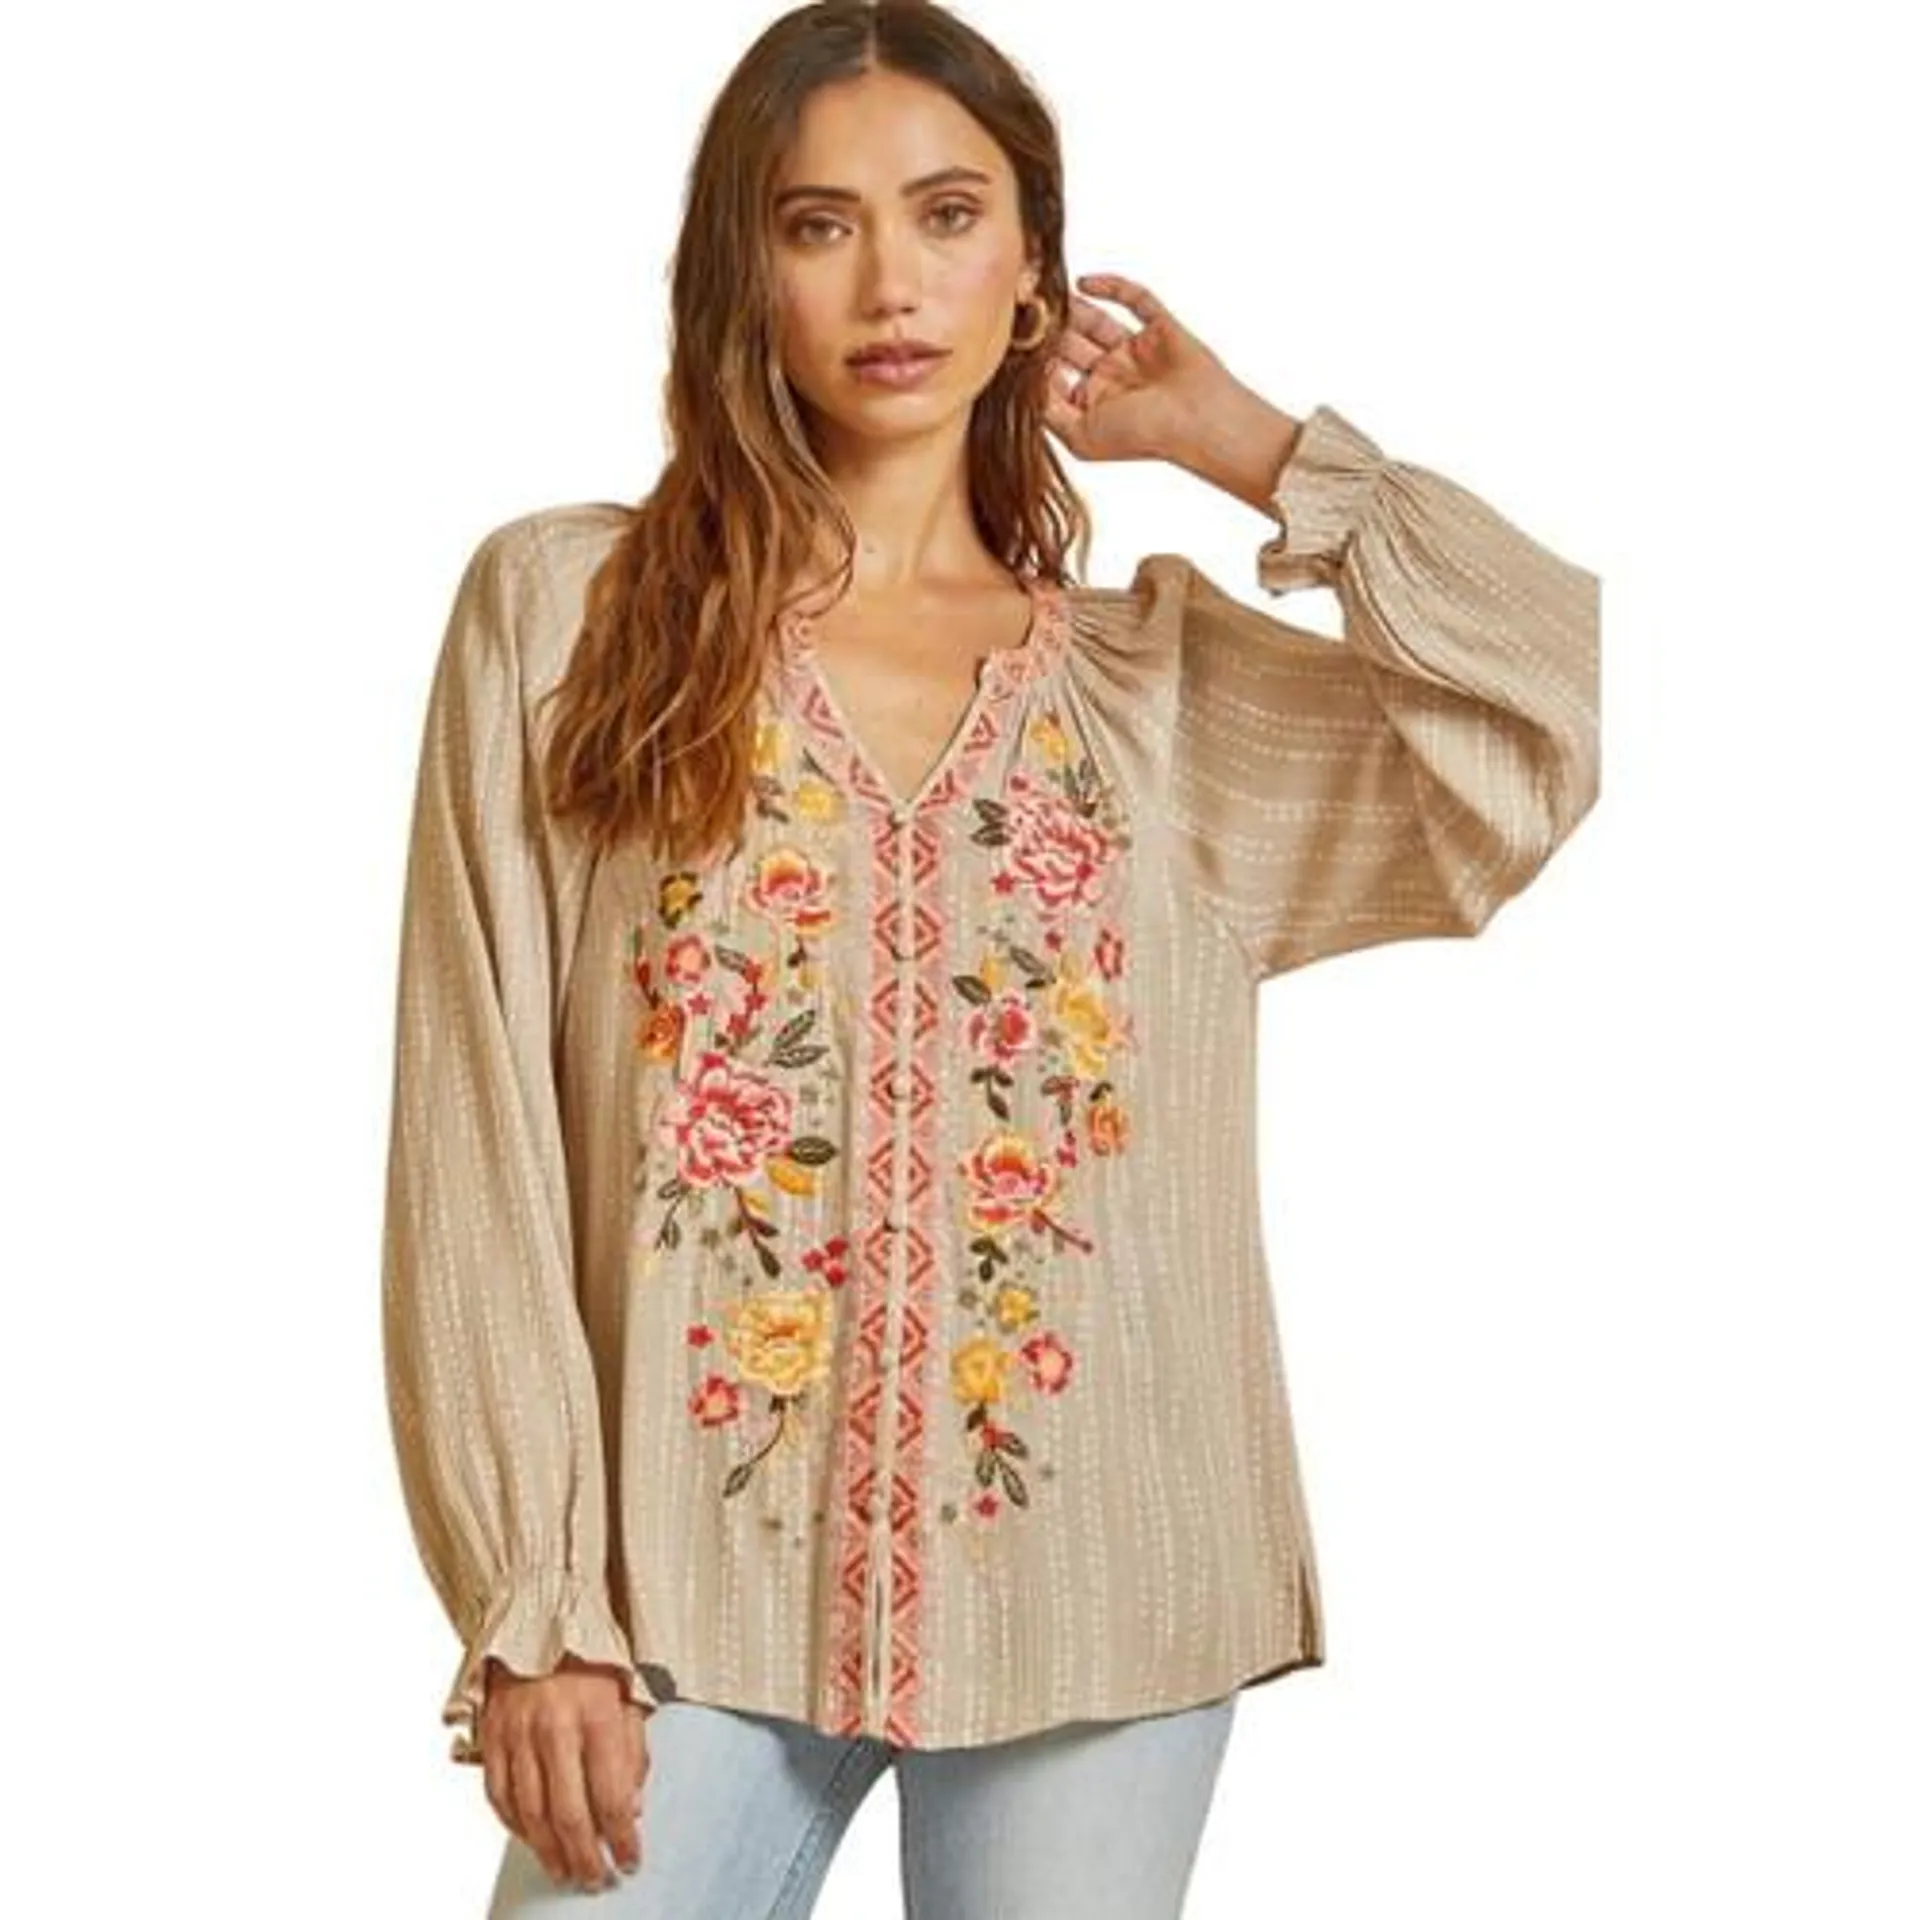 Savanna Jane Womens Mocha Floral Embroidered Long Sleeve Relaxed Fit Blouse